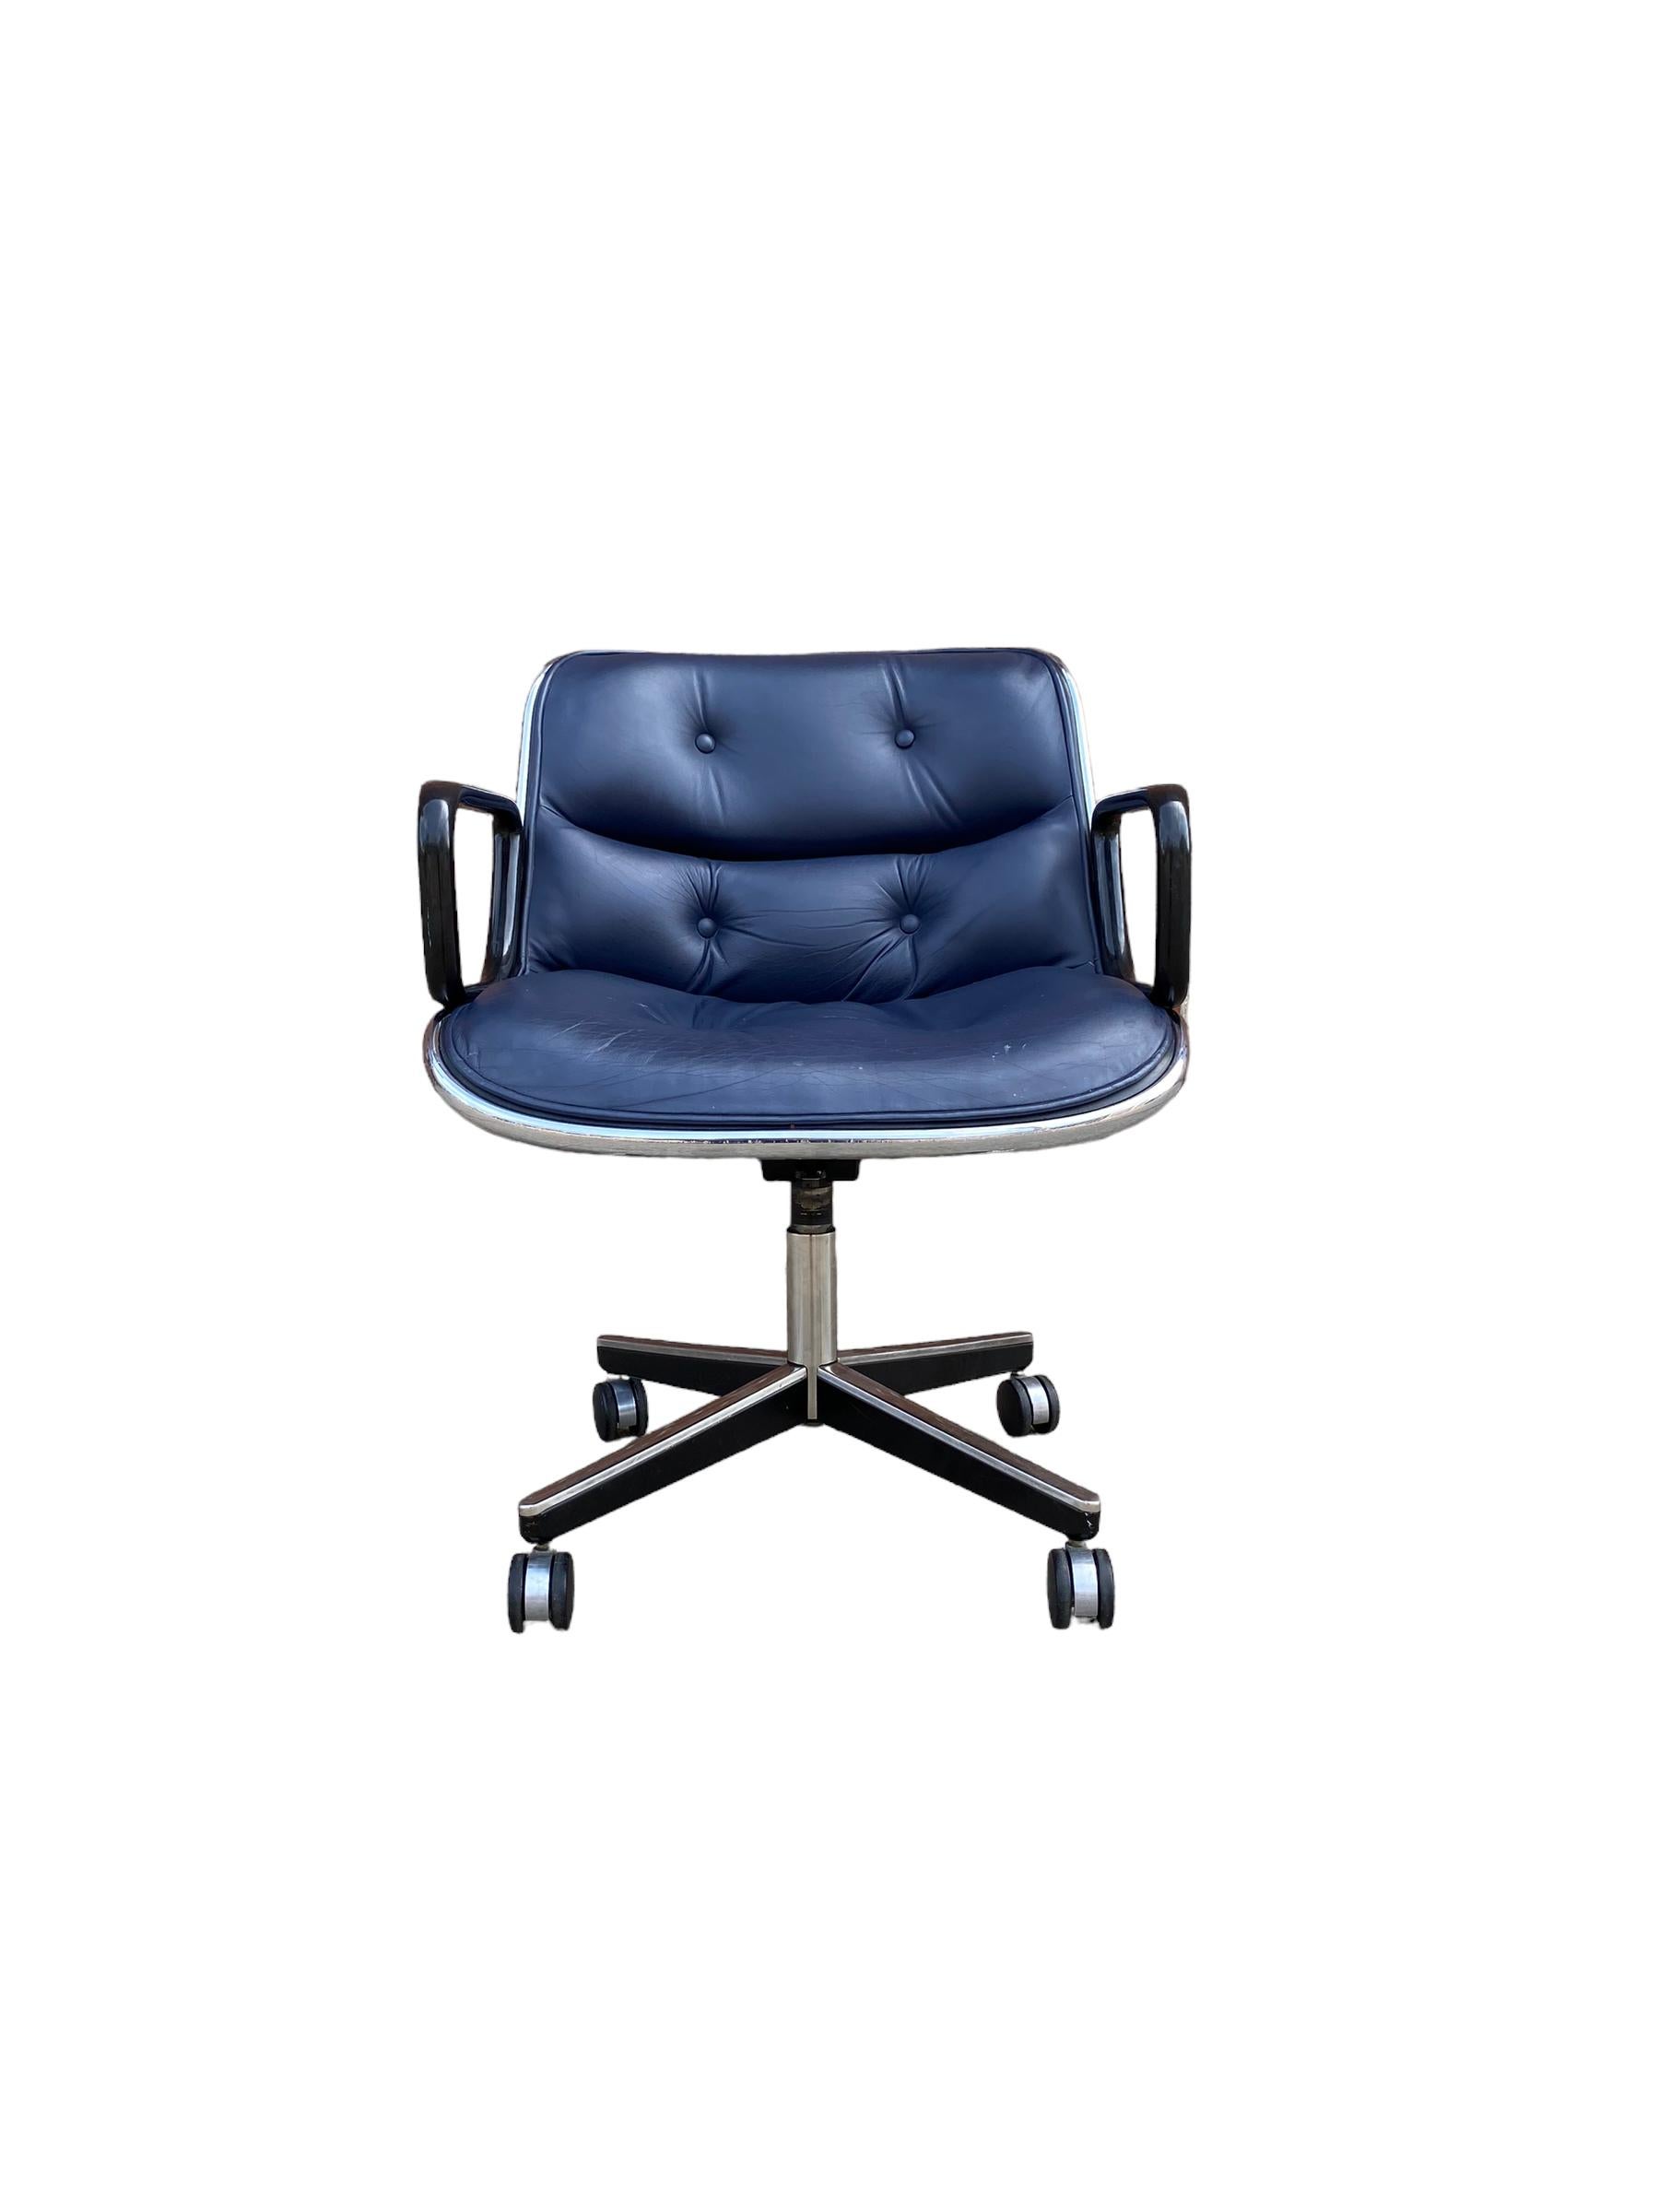 Charles Pollock Desk Chair by Knoll in Navy Blue Leather For Sale 2